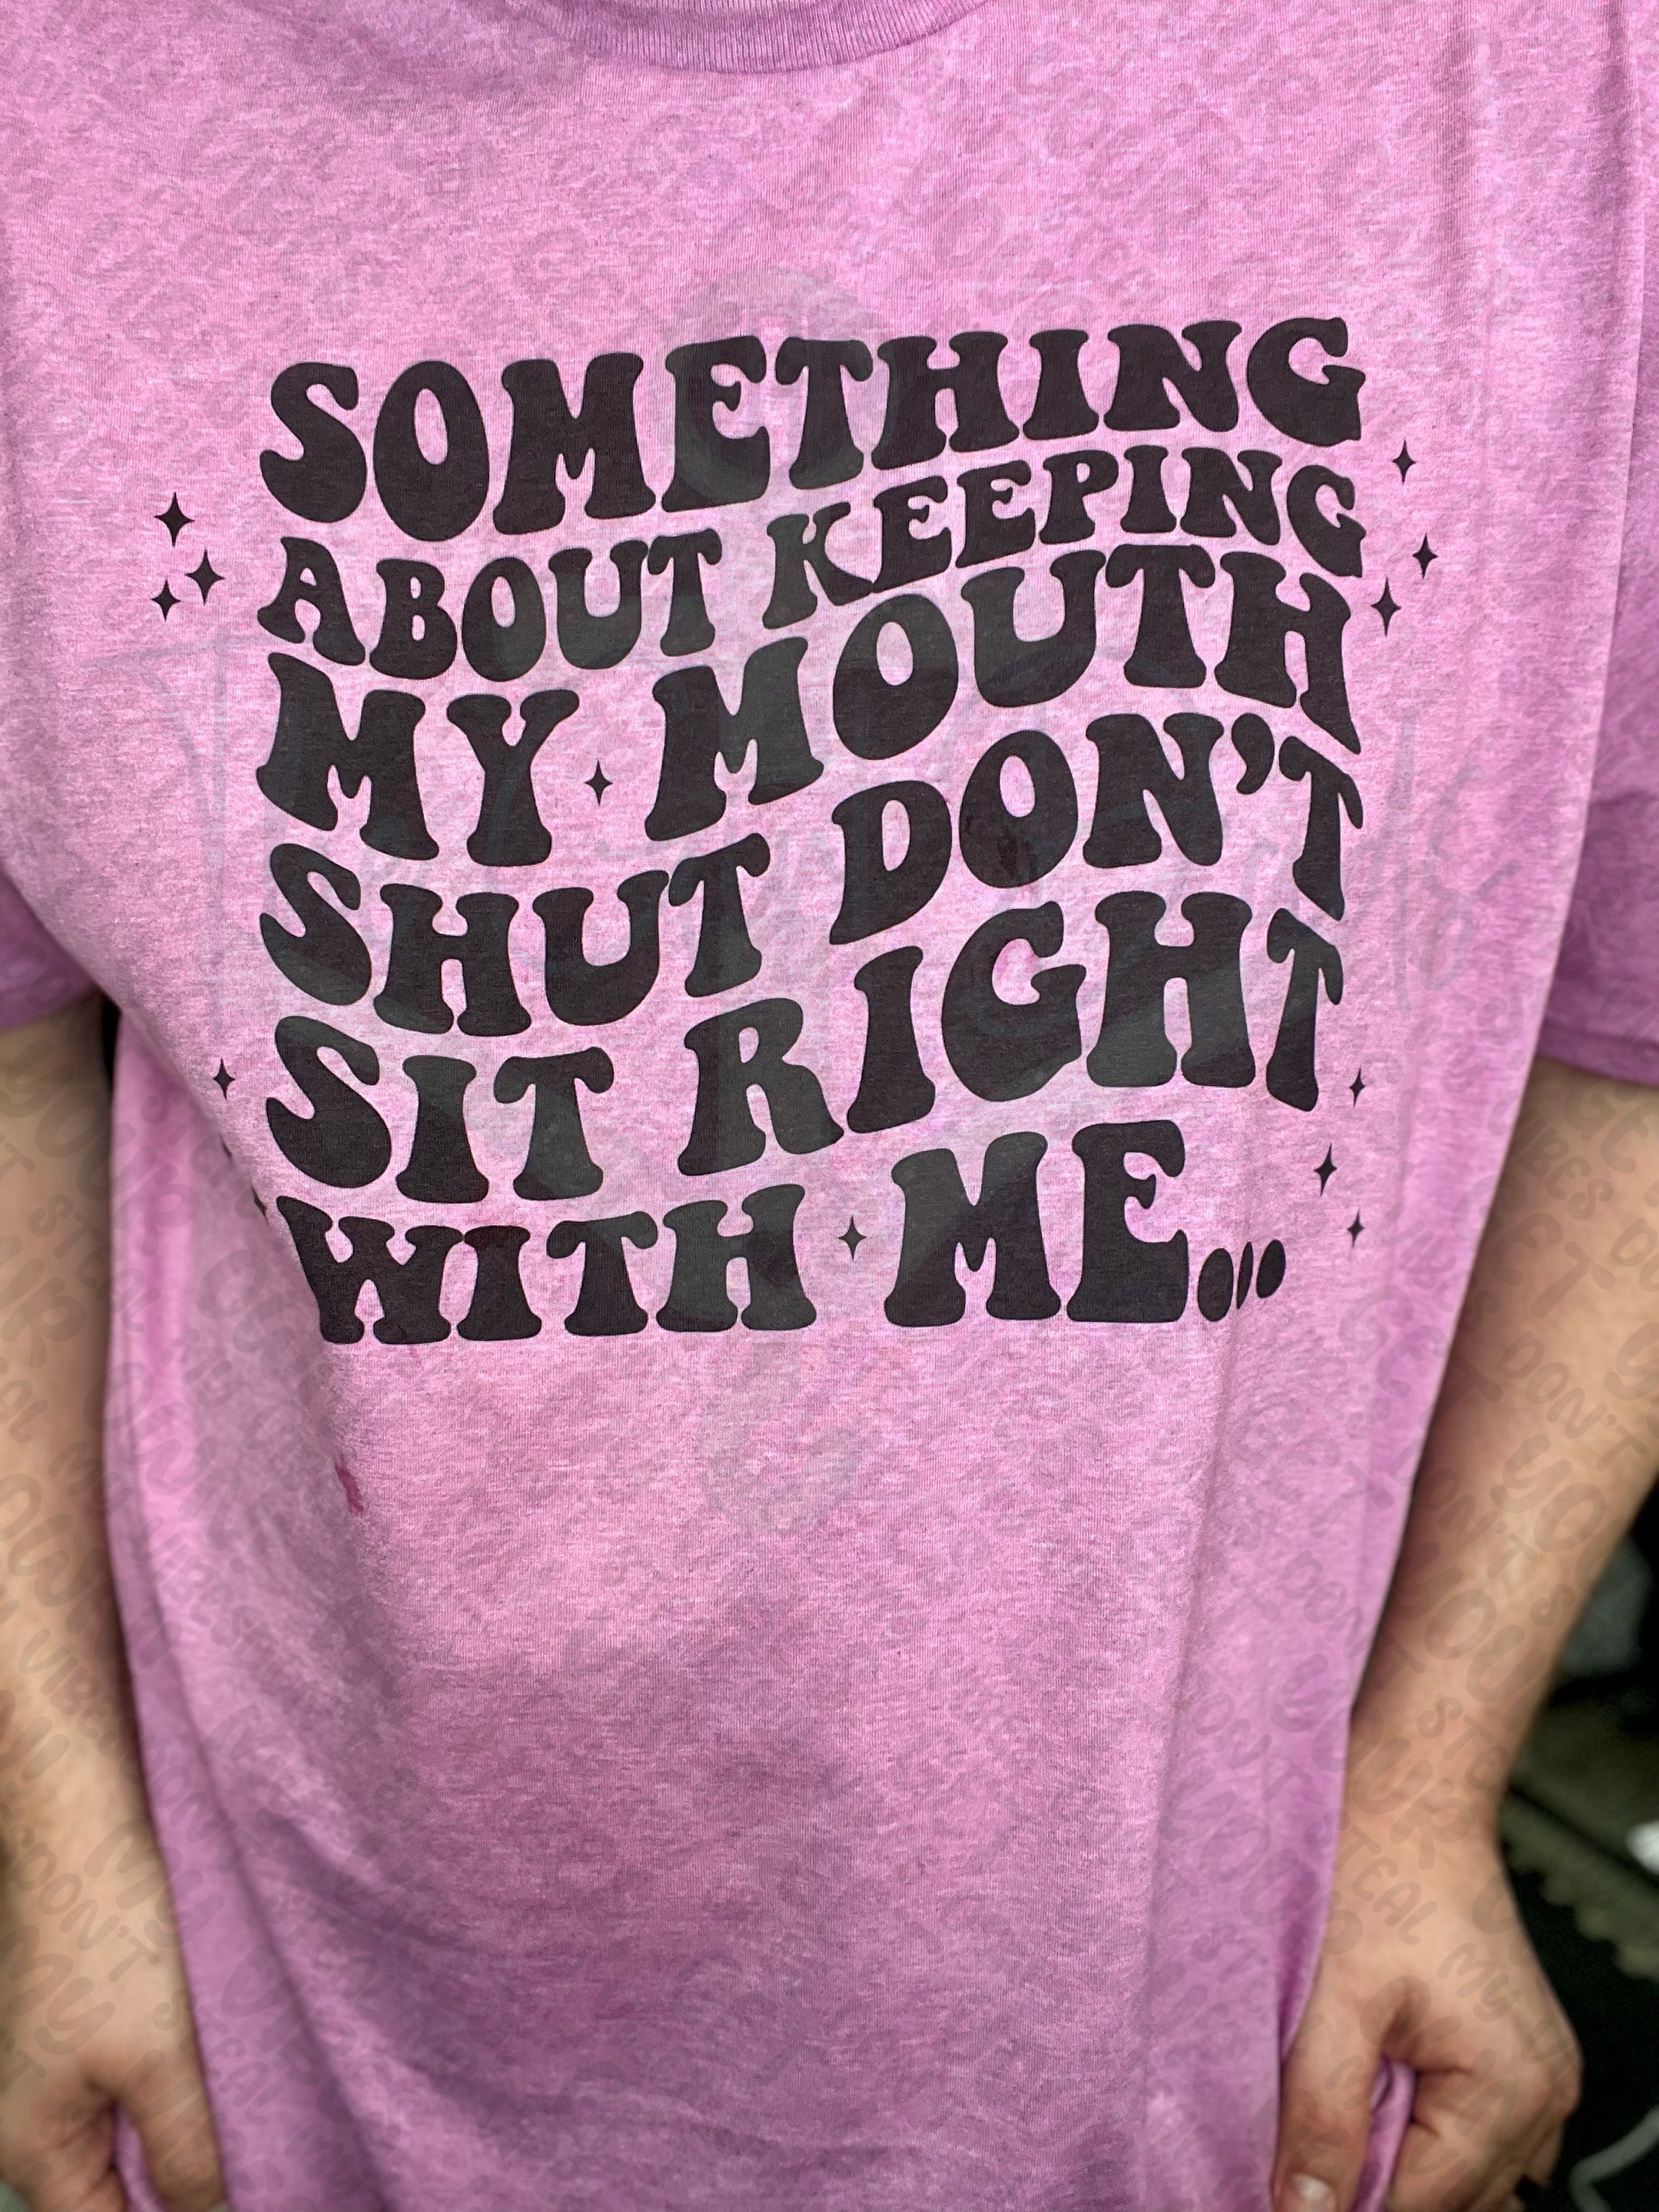 Something About Keeping My Mouth Shut Don't Sit Right With Me Top Design